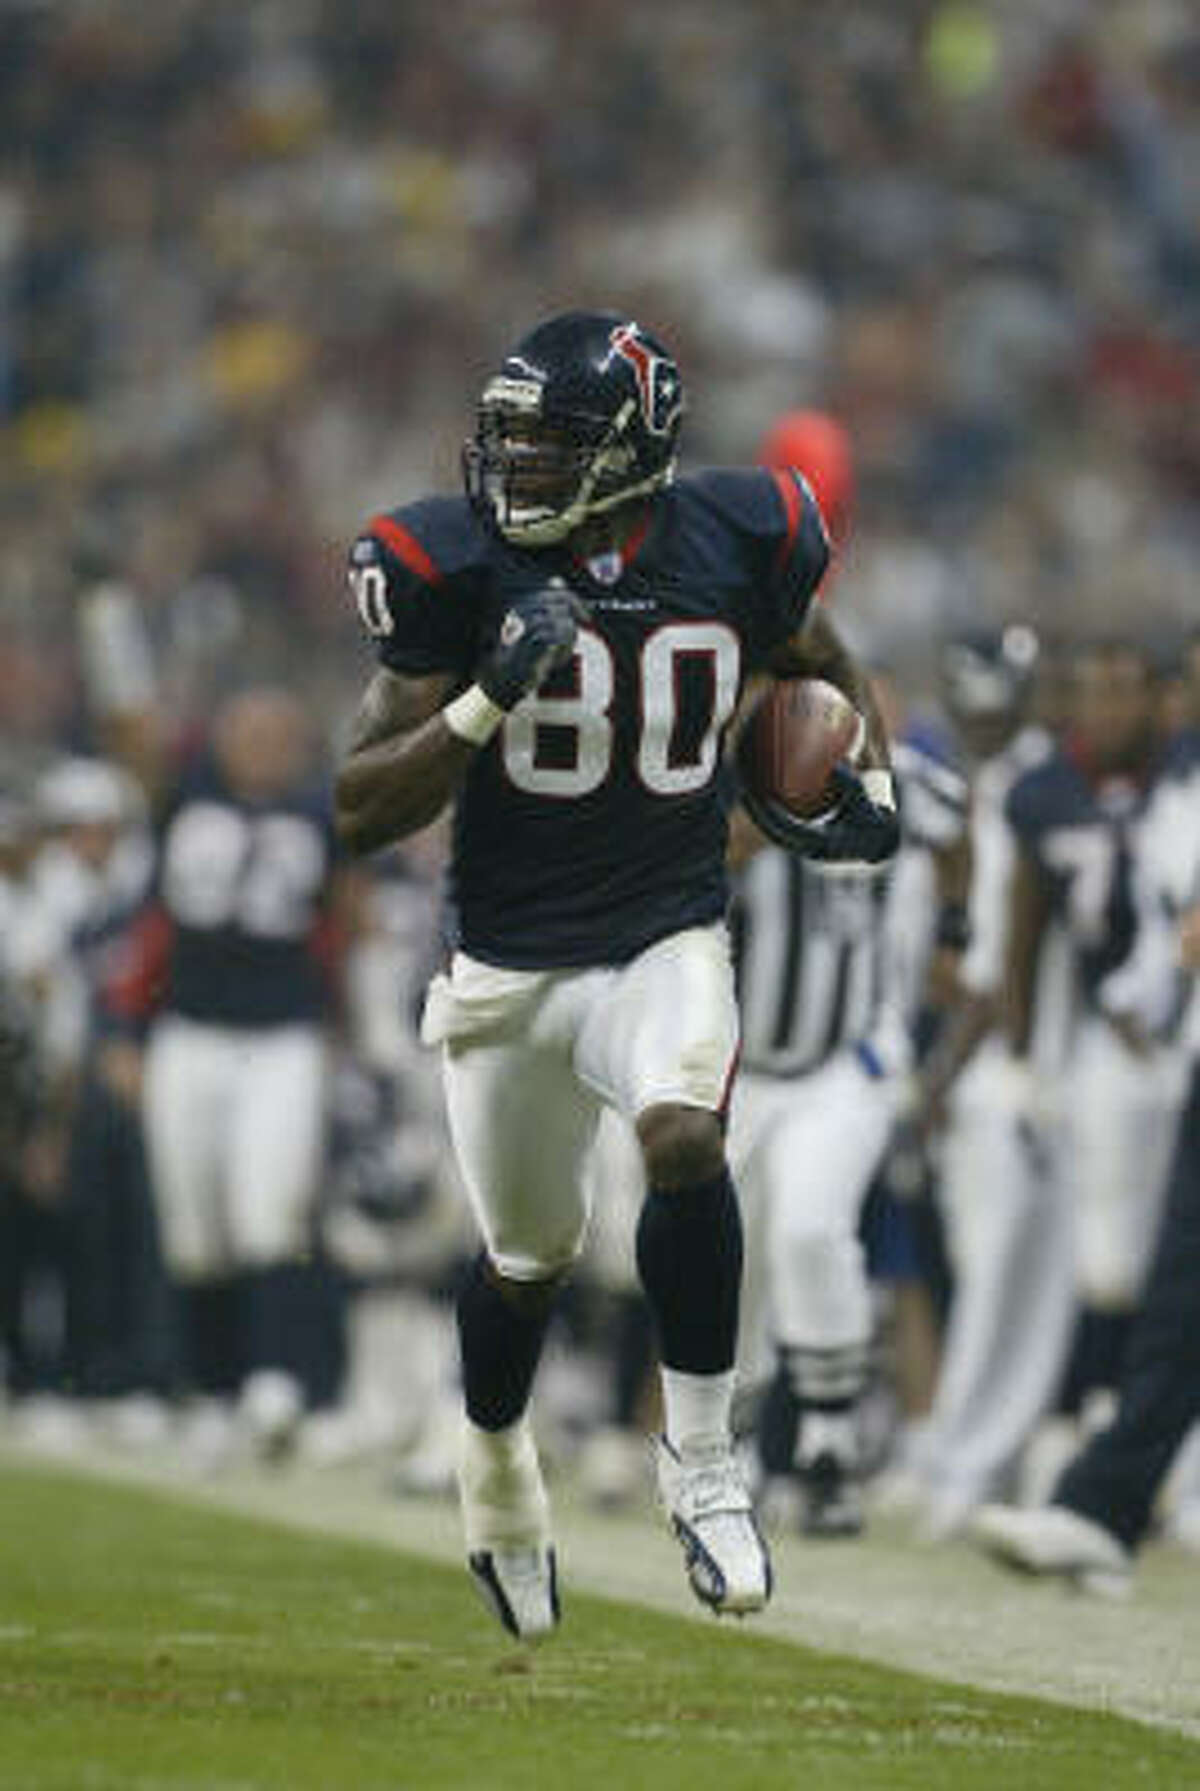 2004 Wide receiver Andre Johnson was named to his first Pro Bowl.